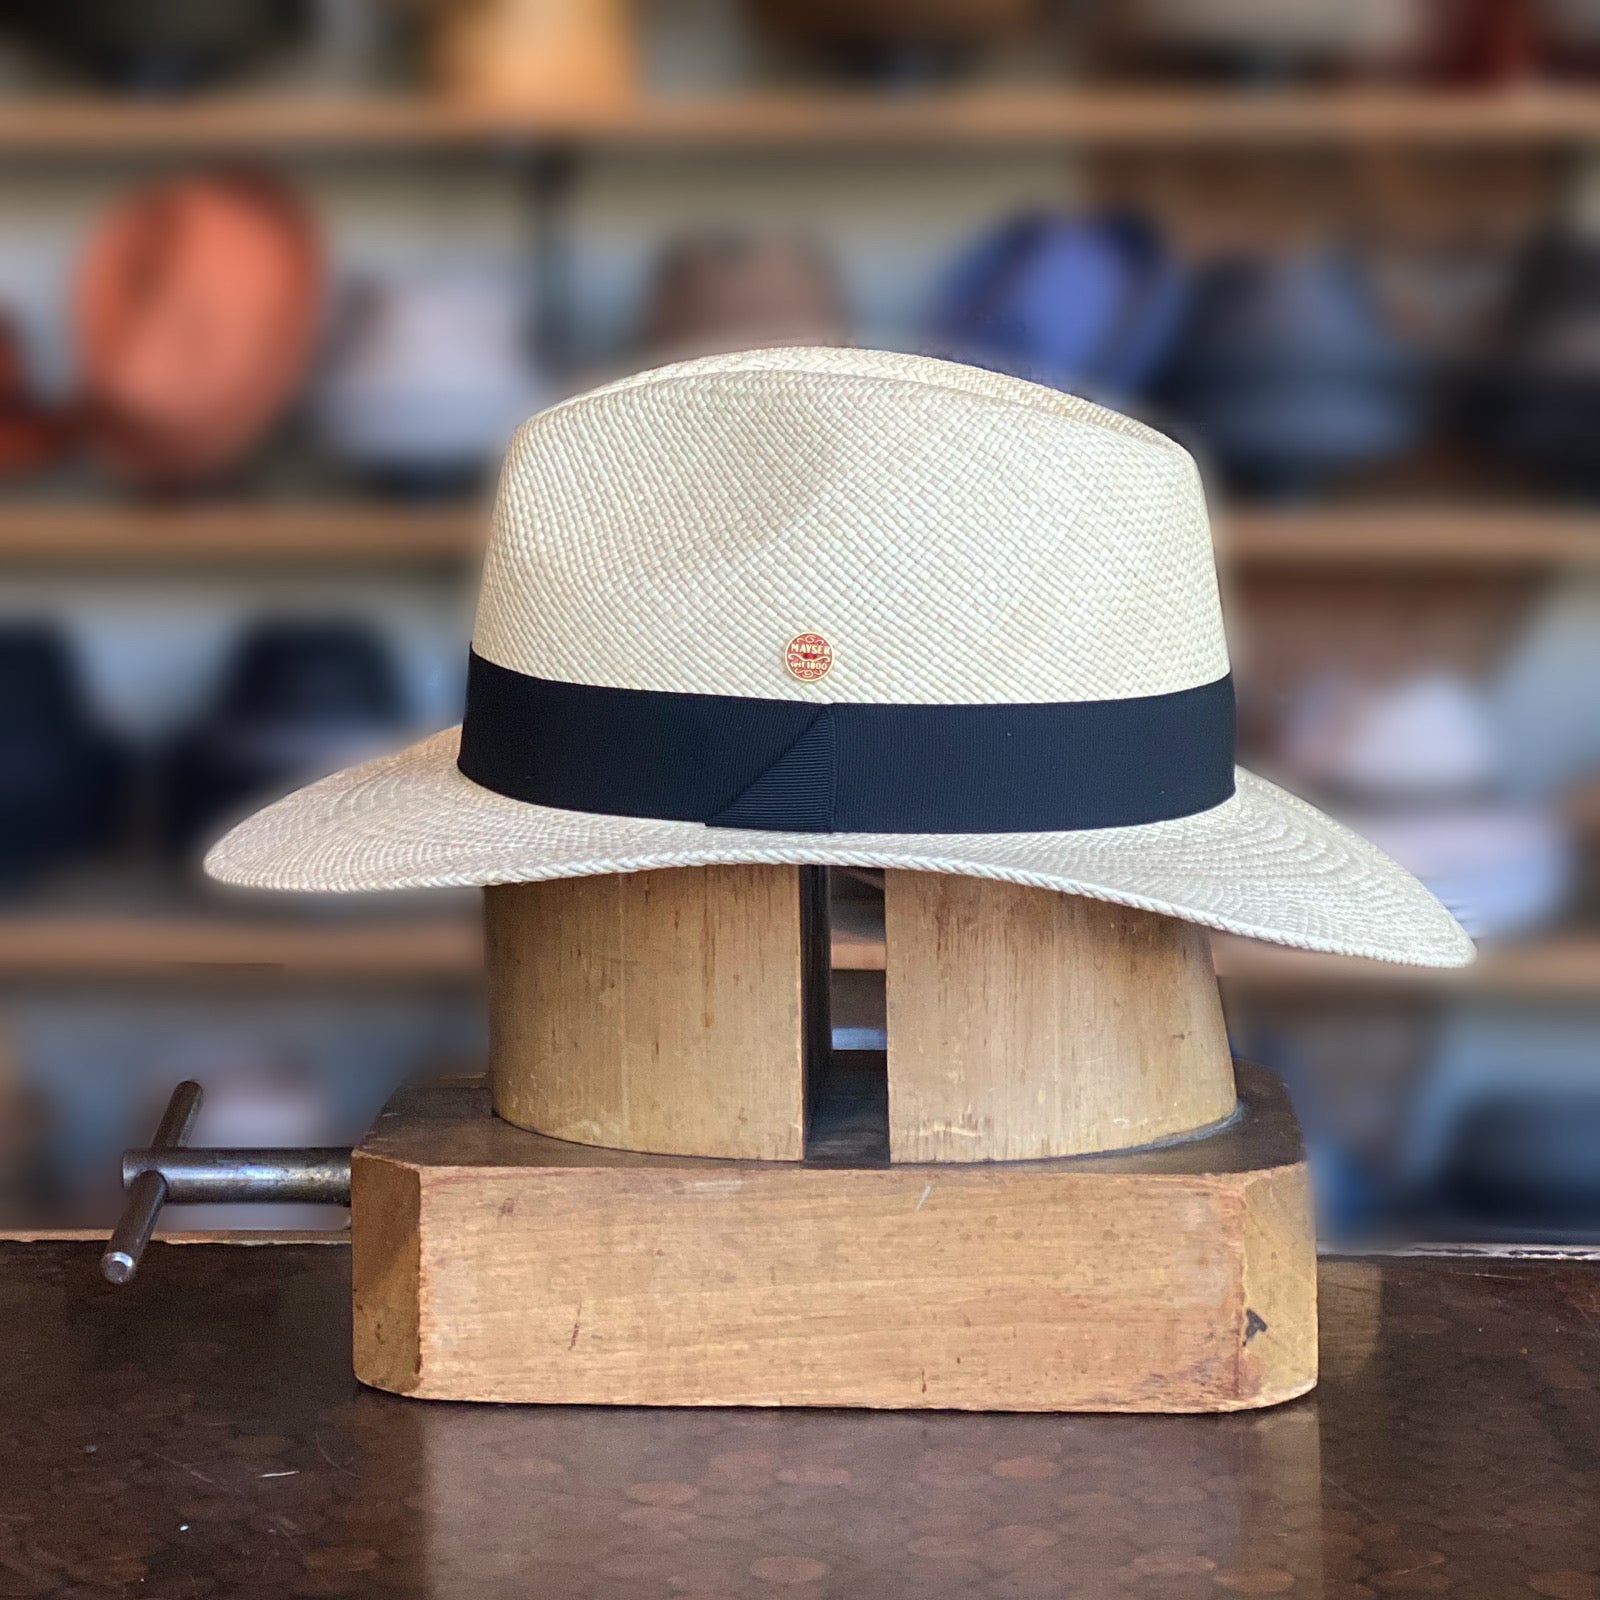 Can be rolls up for packing -Handmade panama hat-Gedeon